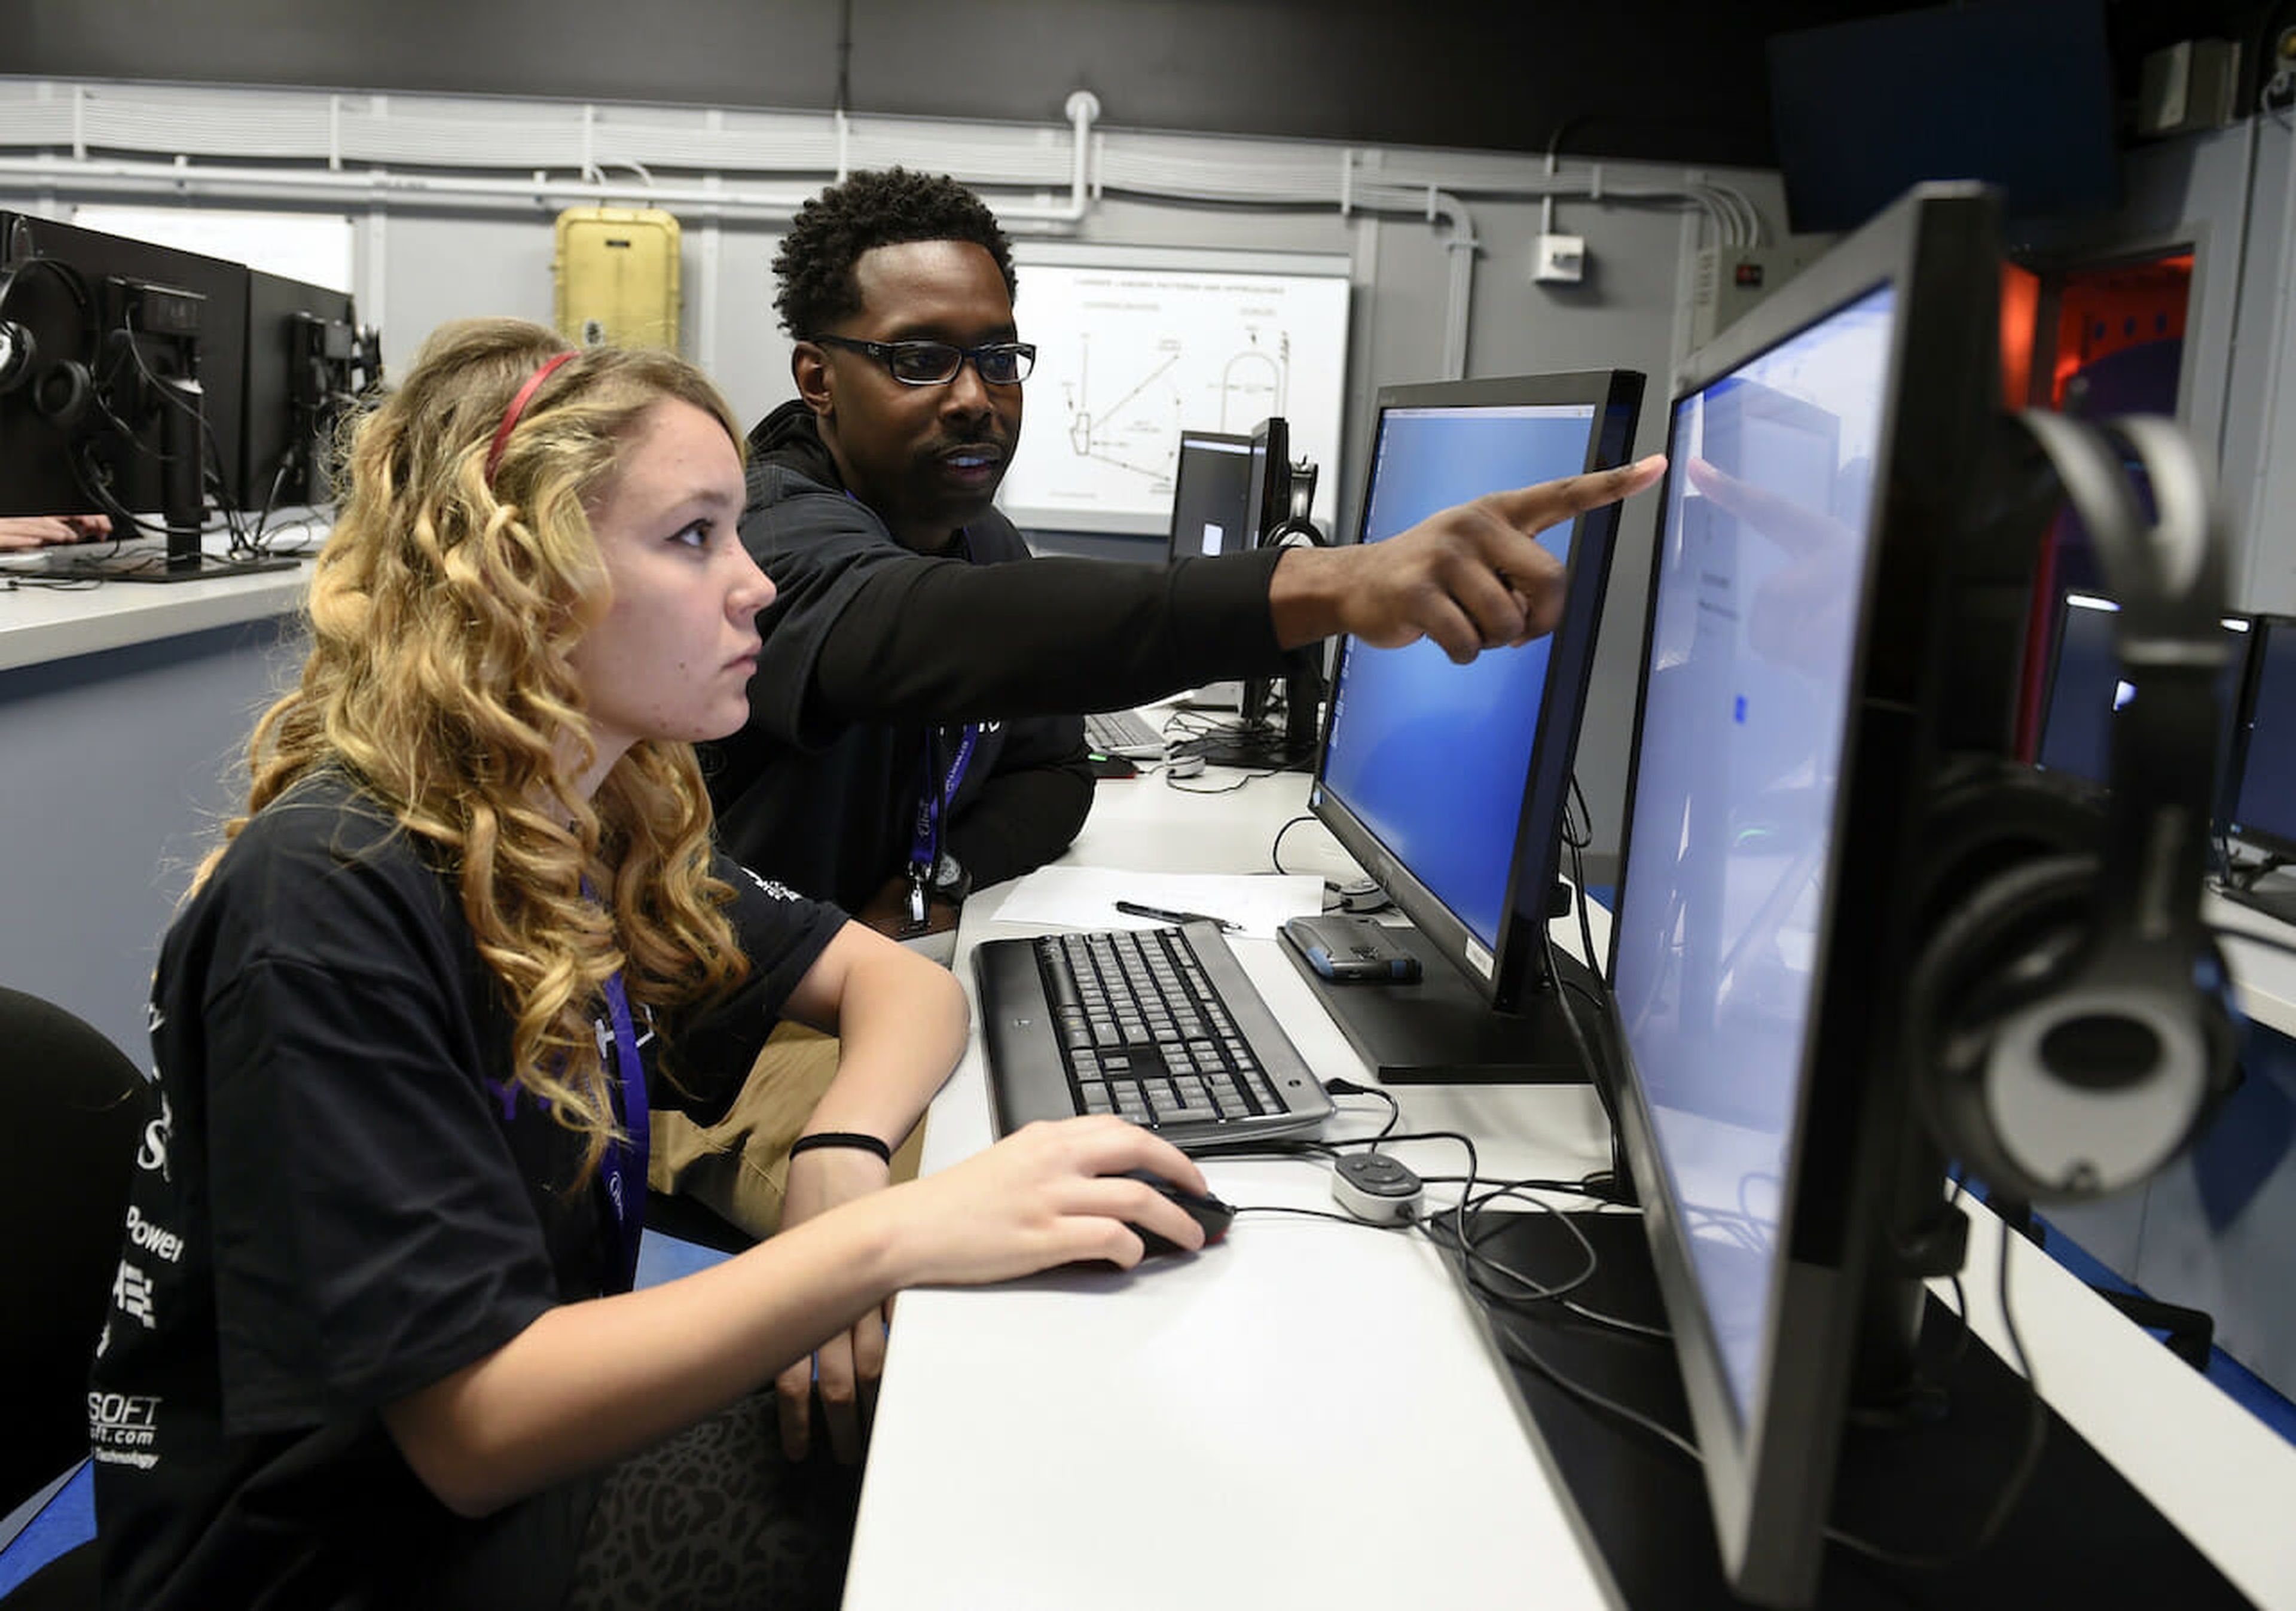 A Naval cryptologic technician works with a high school student at a Cyberthon in Pensacola, Fla. Today’s columnist, David “Moose” Wolpoff of Randori, says companies spend too much money on tools they don’t use. Better to invest in people and train them so they really know how to use the tools. (Official U.S. Navy Imagery CC BY 2.0)